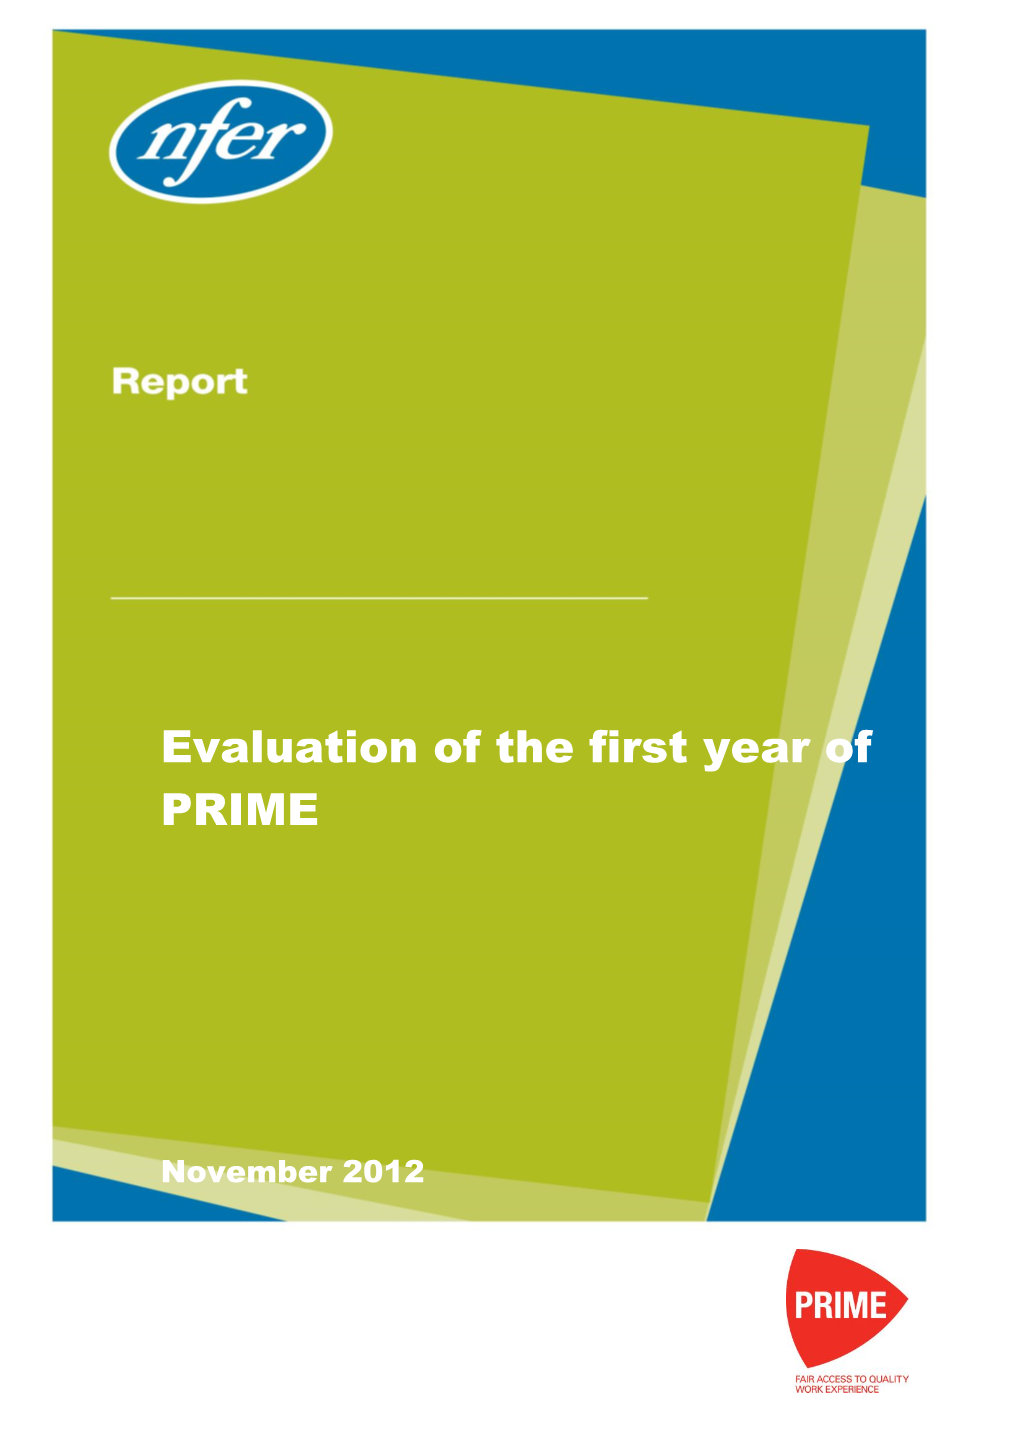 Evaluation of the First Year of PRIME